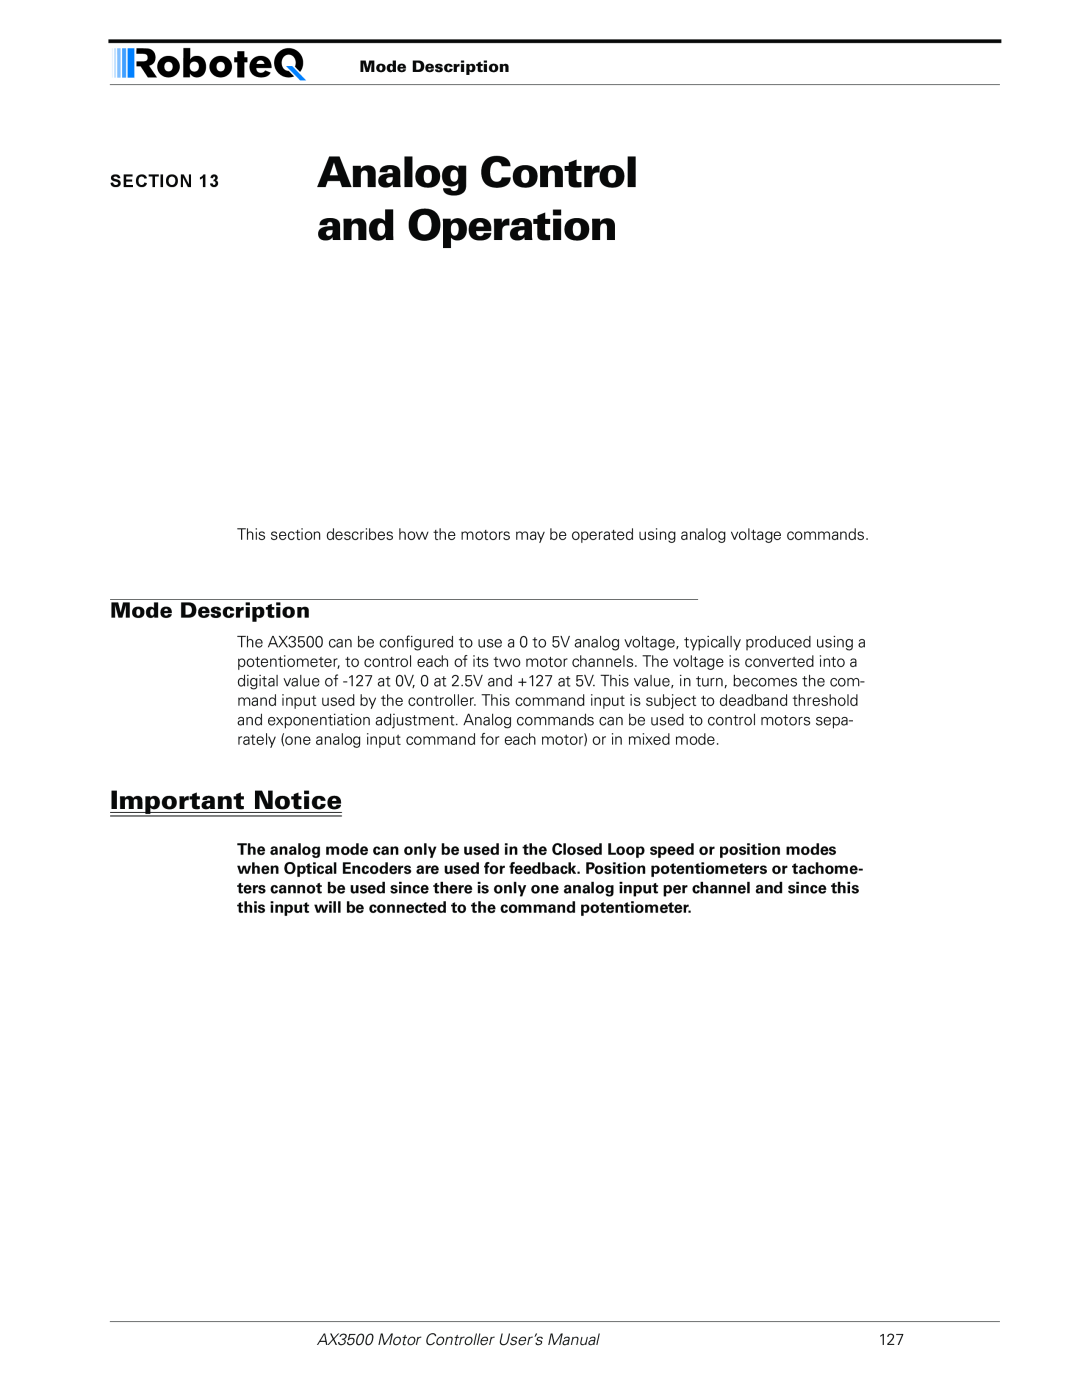 RoboteQ Analog Control and Operation, Important Notice, Mode Description, AX3500 Motor Controller User’s Manual 